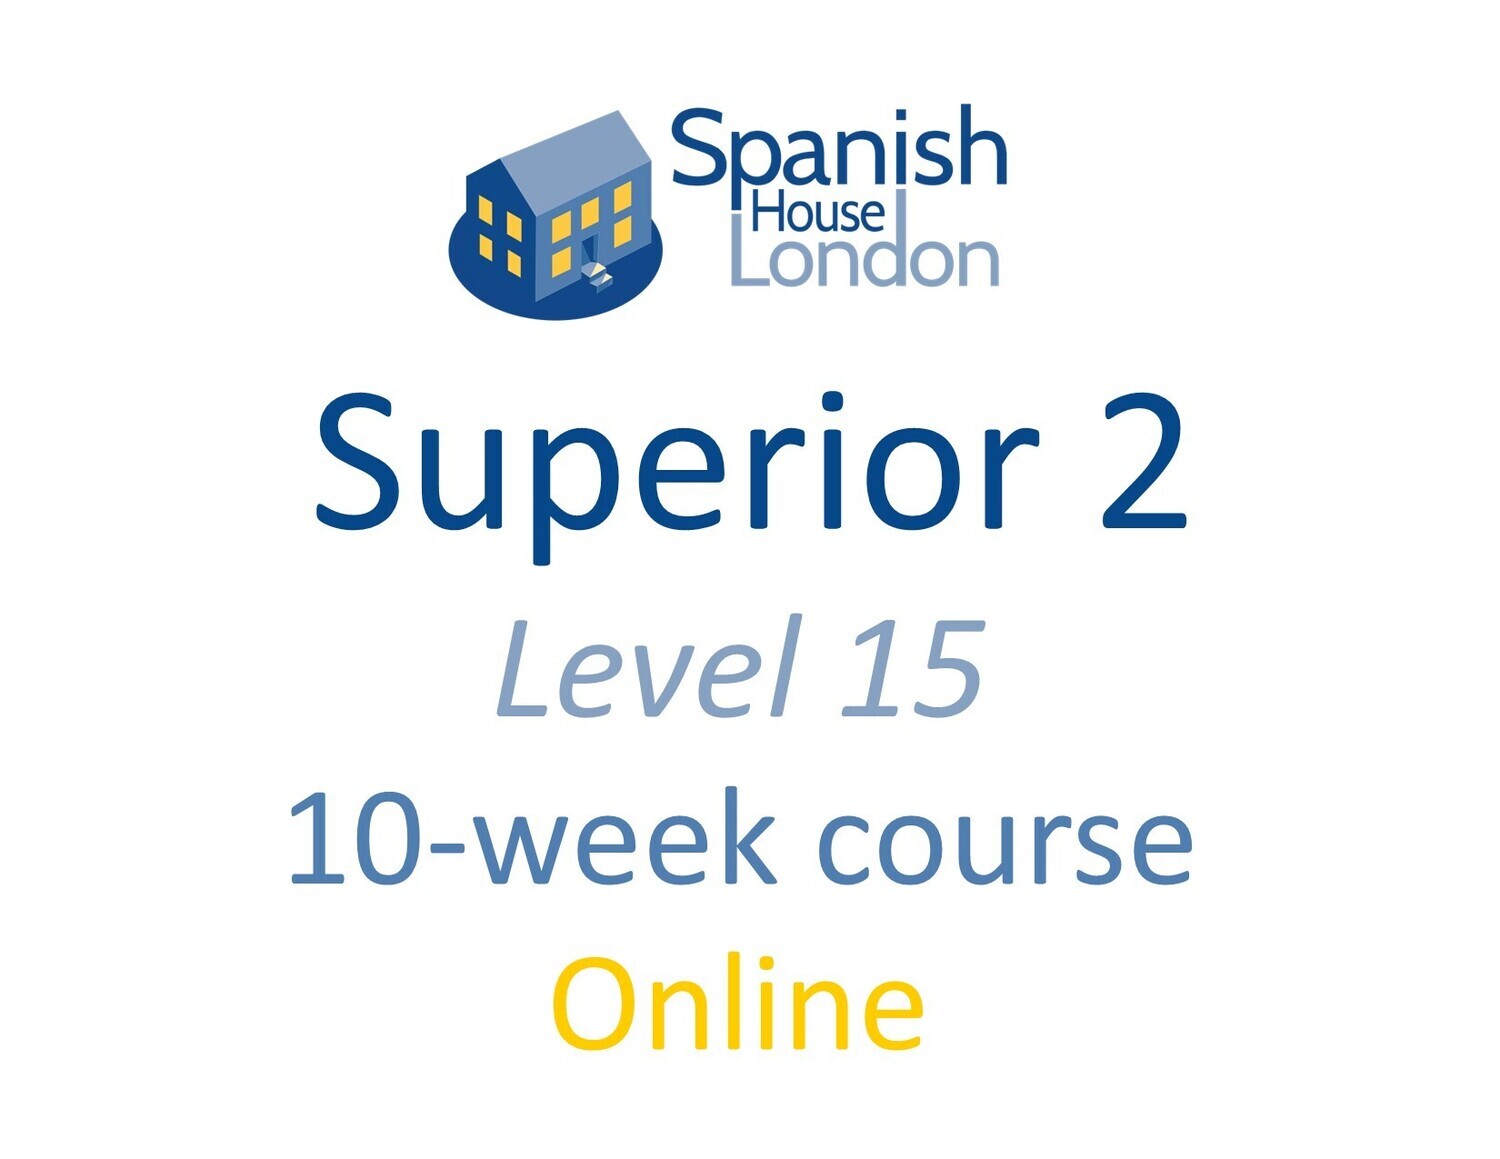 Superior 2 Course starting on 7th September at 7.30pm